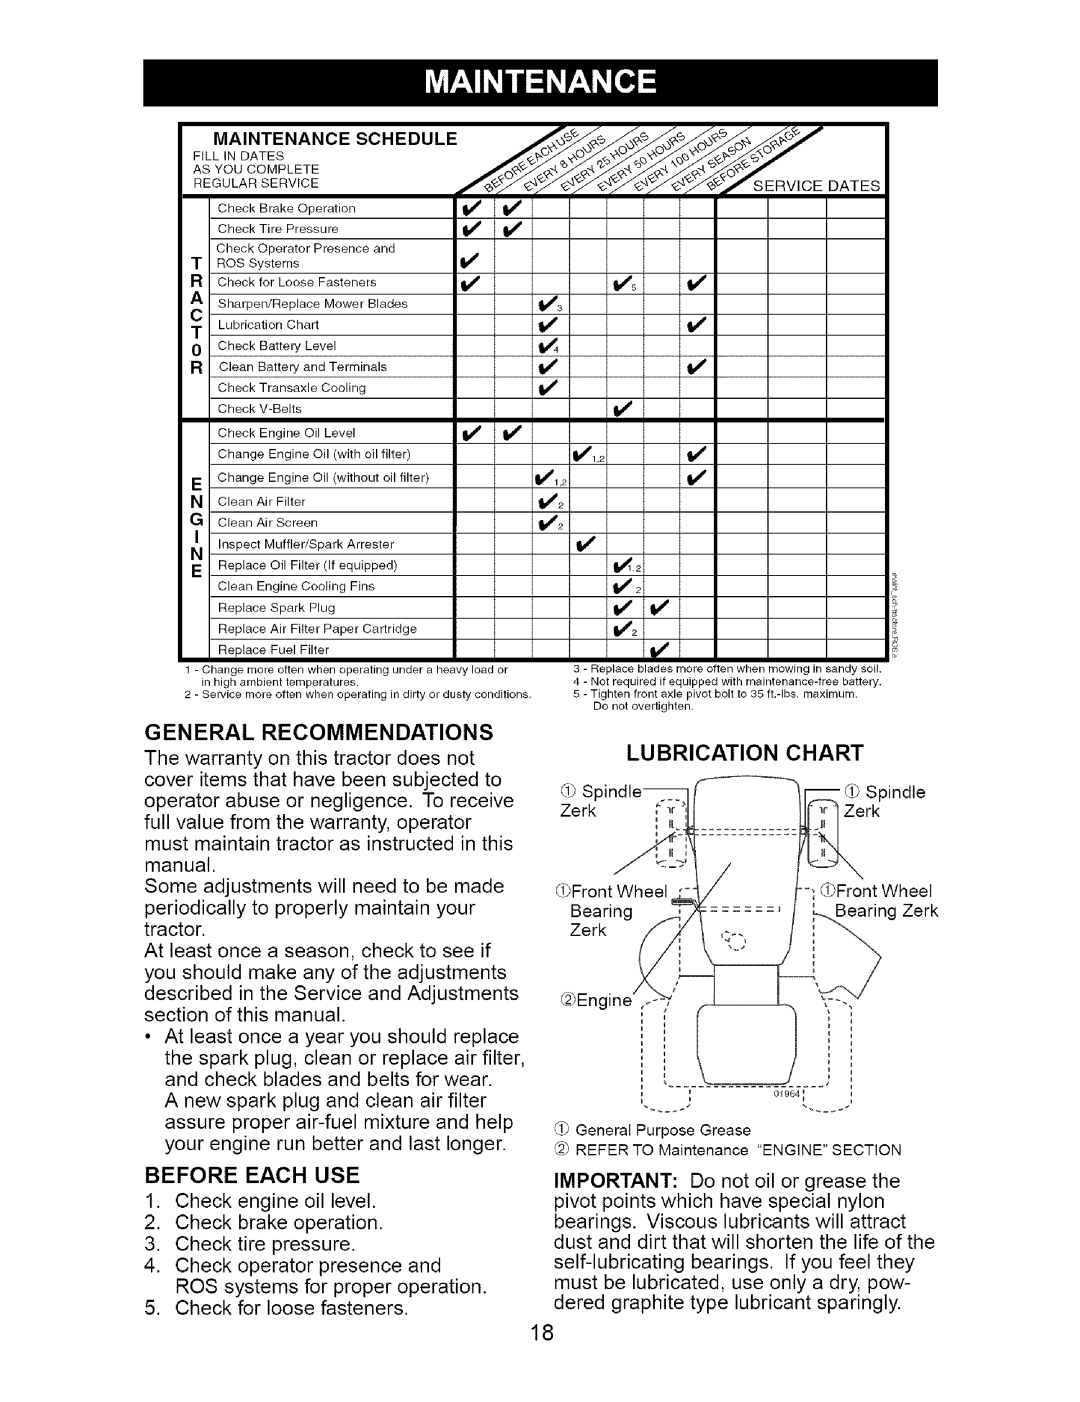 Craftsman 917.274762 owner manual Before Each Use, Lubrication, Chart 